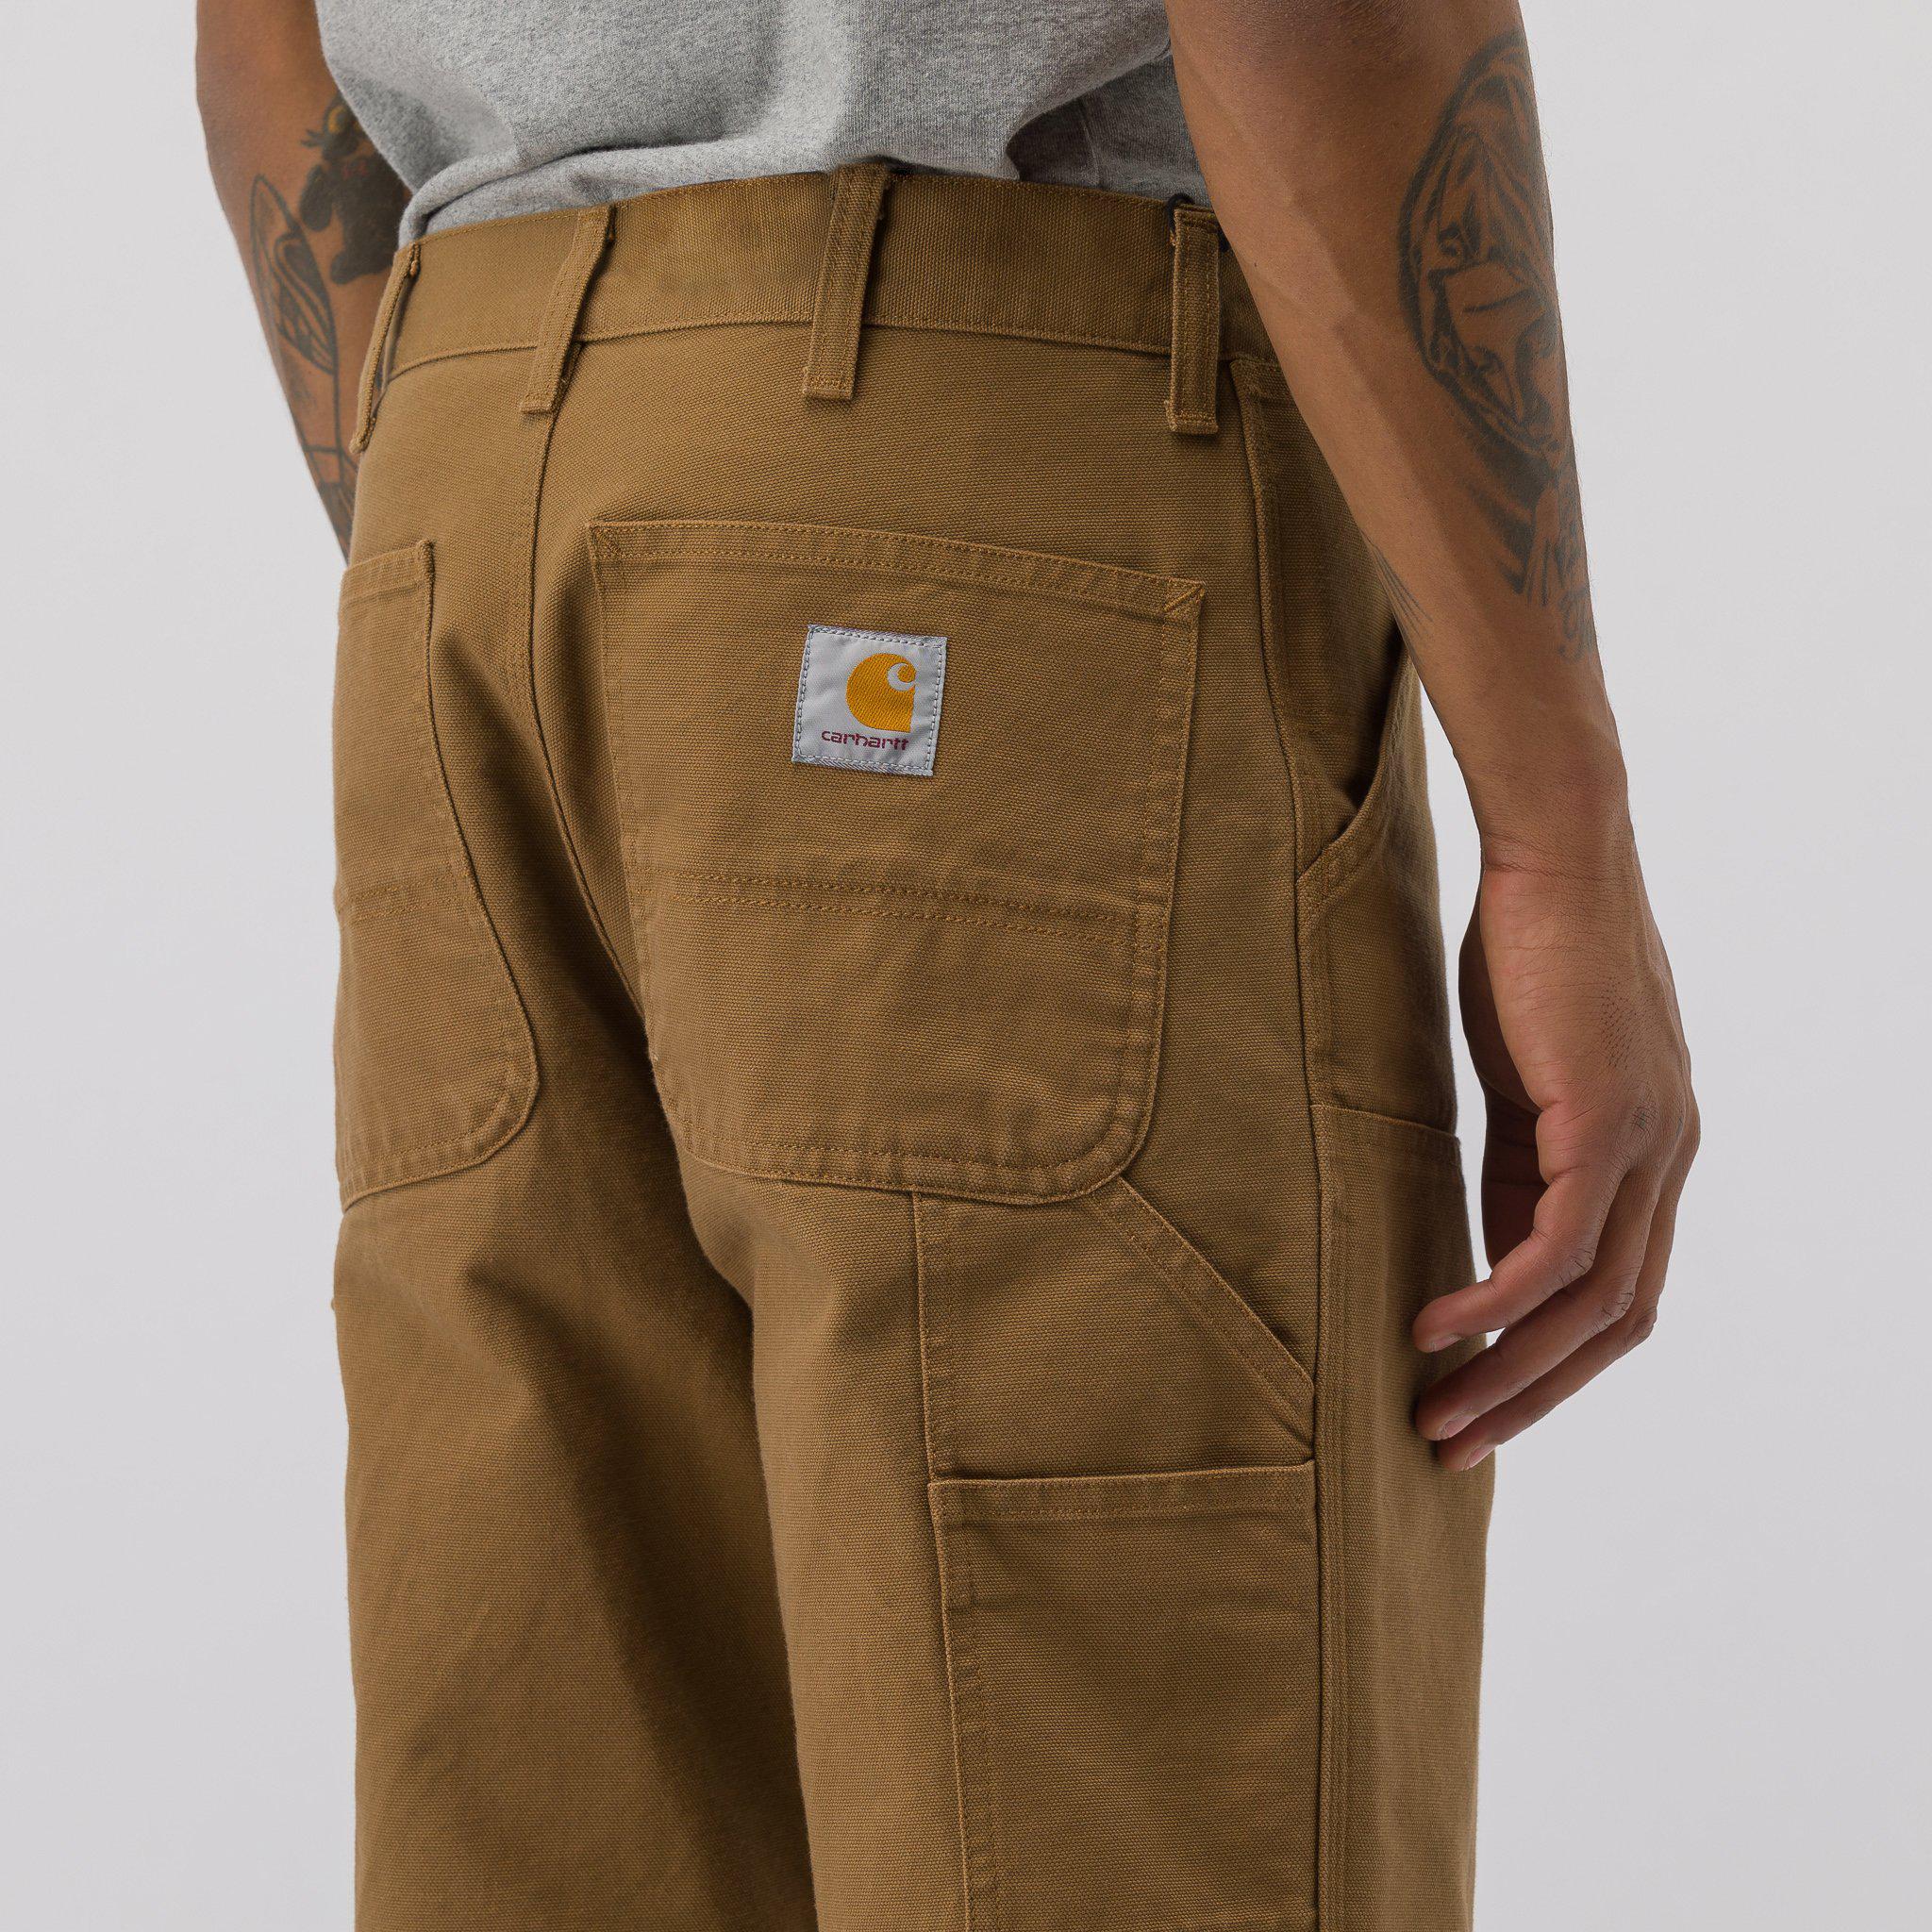 Carhartt WIP Cotton Double Knee Pant In Hamilton Brown for Men - Lyst